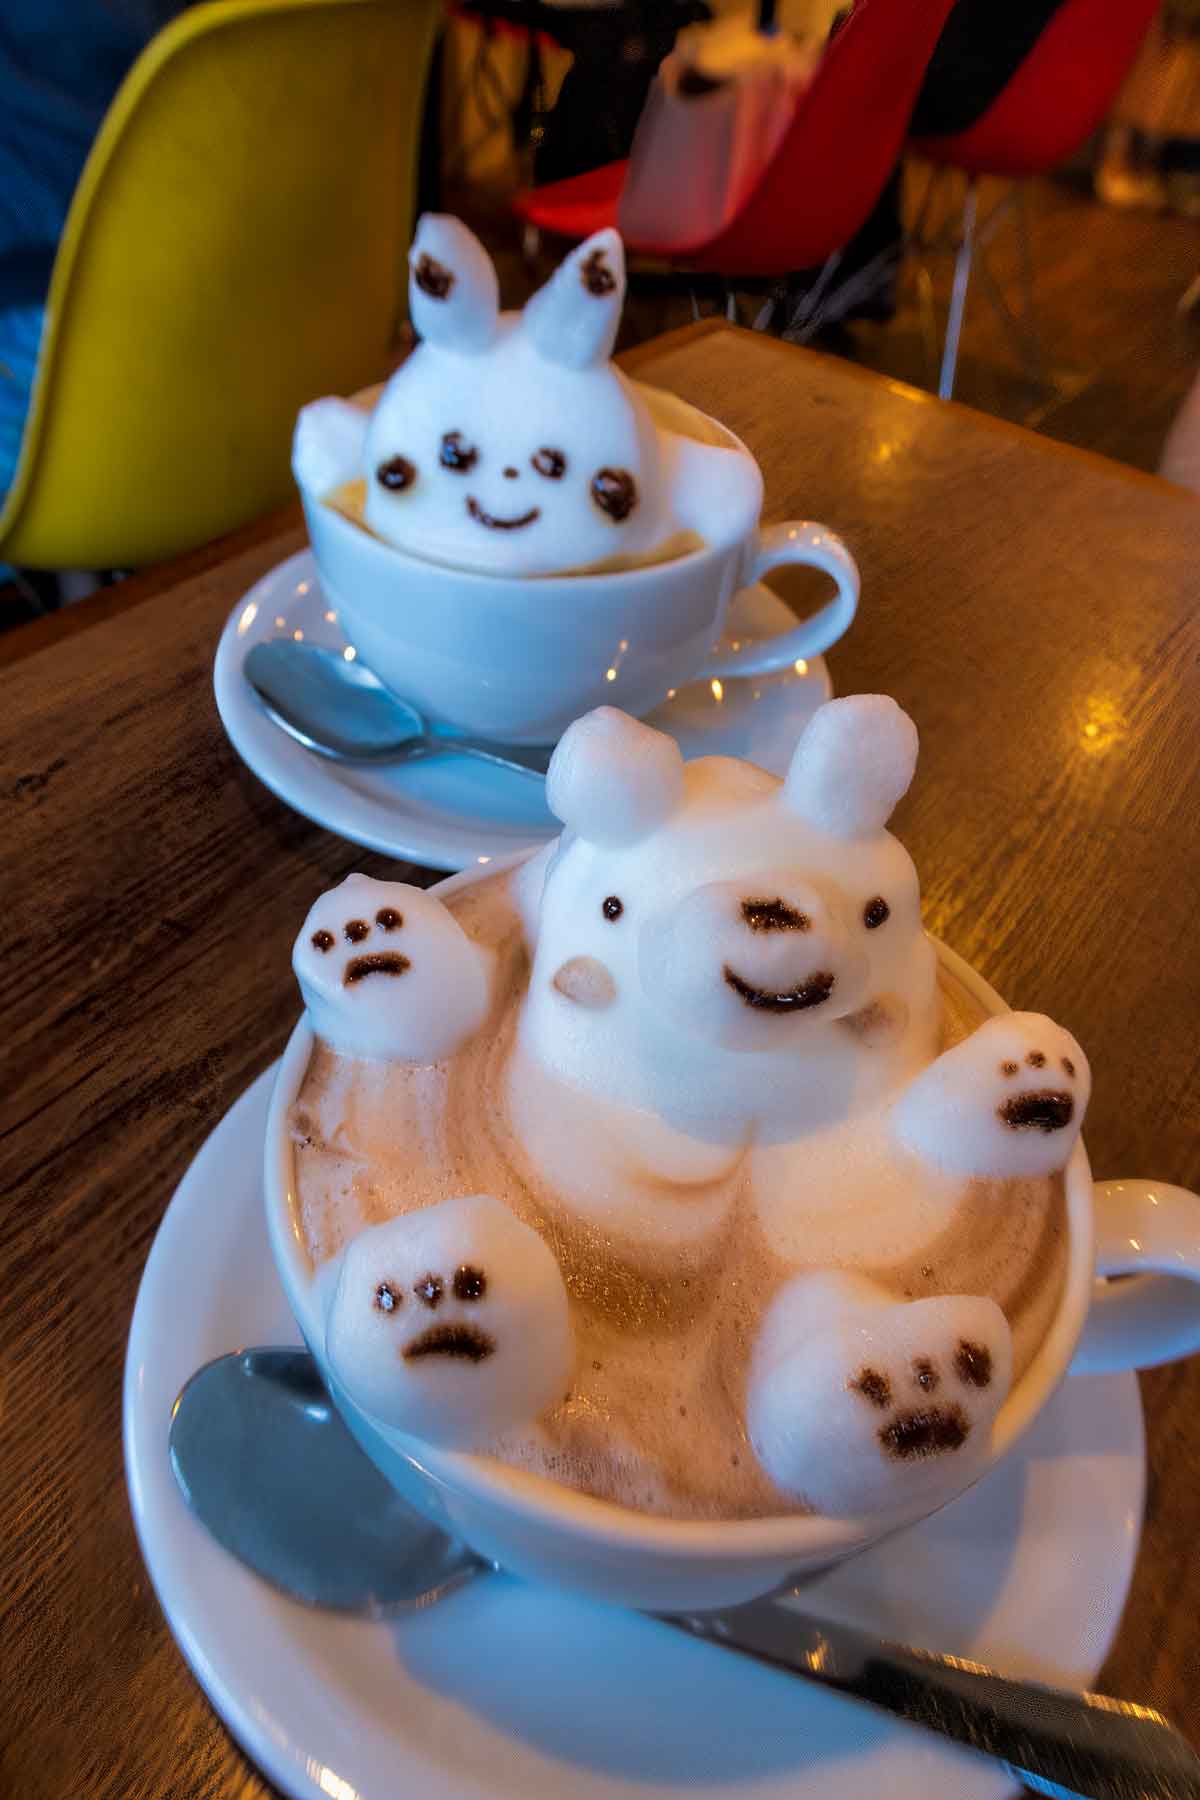 Kawaii character coffee at Reissue Cafe in Shibuya